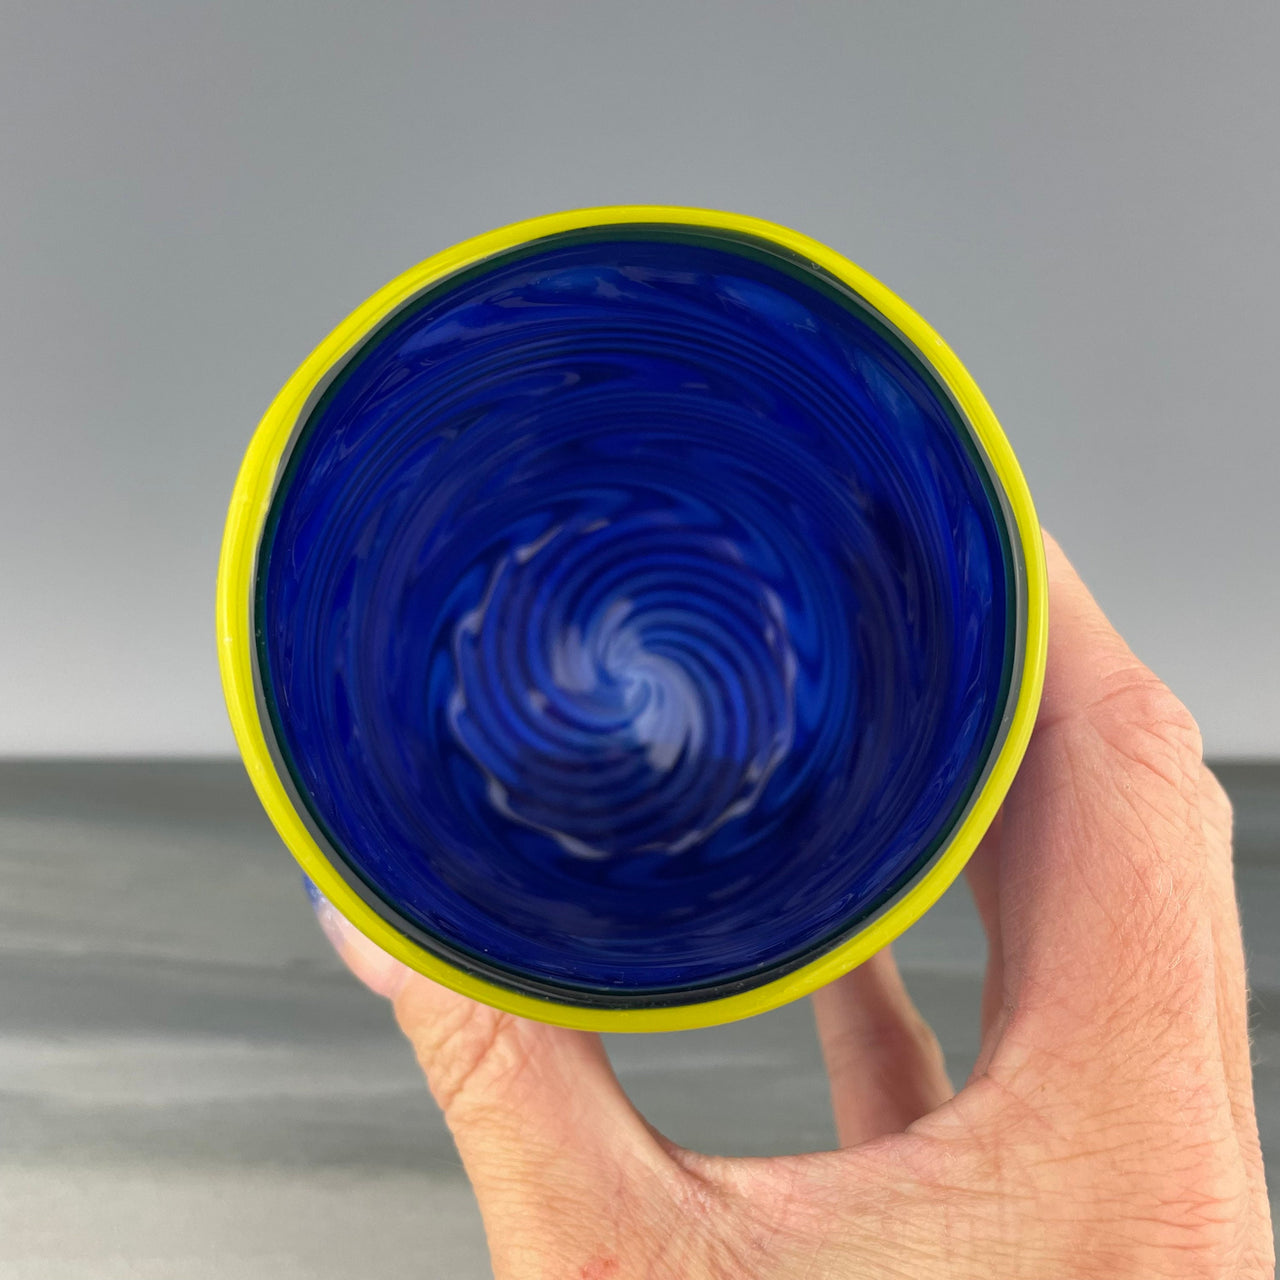 inside of a cobalt blue cup with a yellow rim